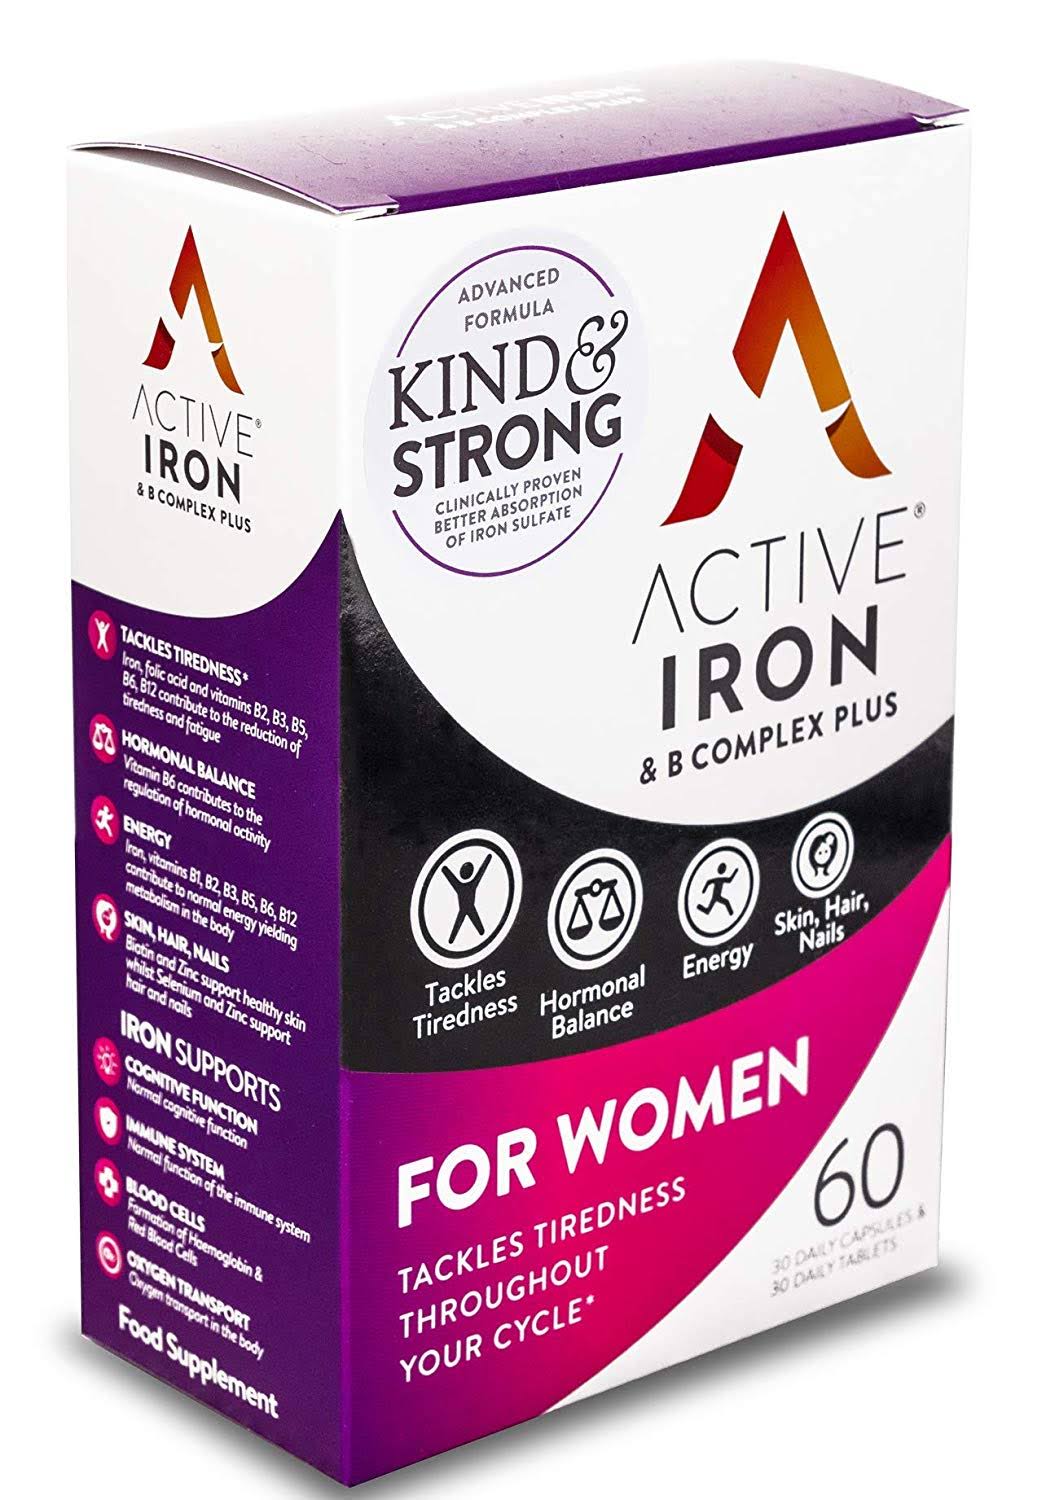 Active Iron & B Complex Plus for Women - 60cps/tbs